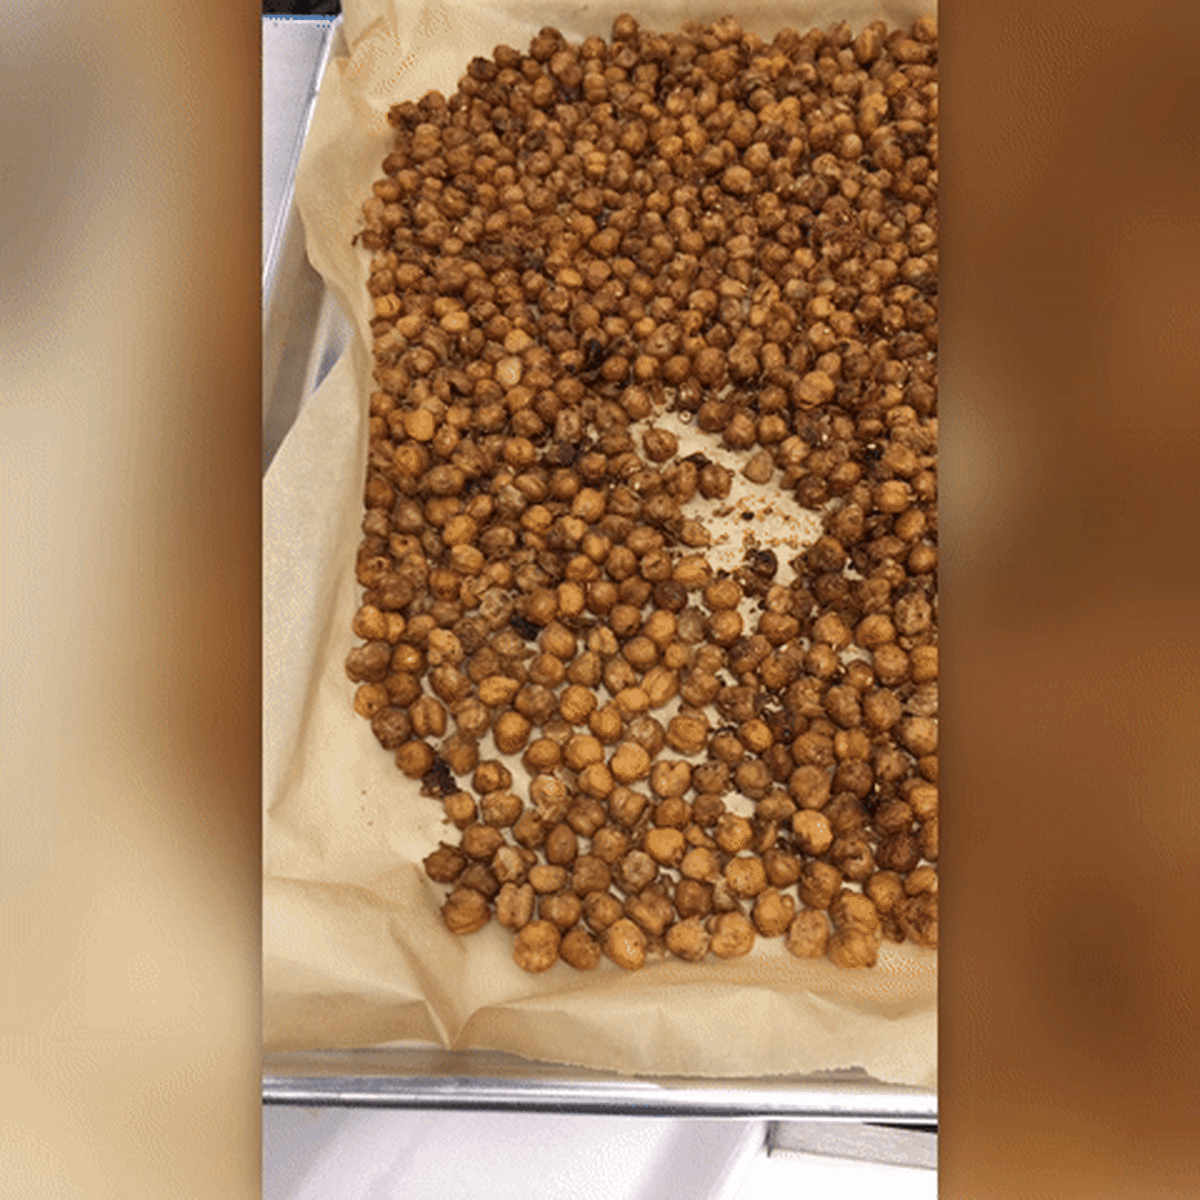 2019-06-24-what-i-eat-chickpeas